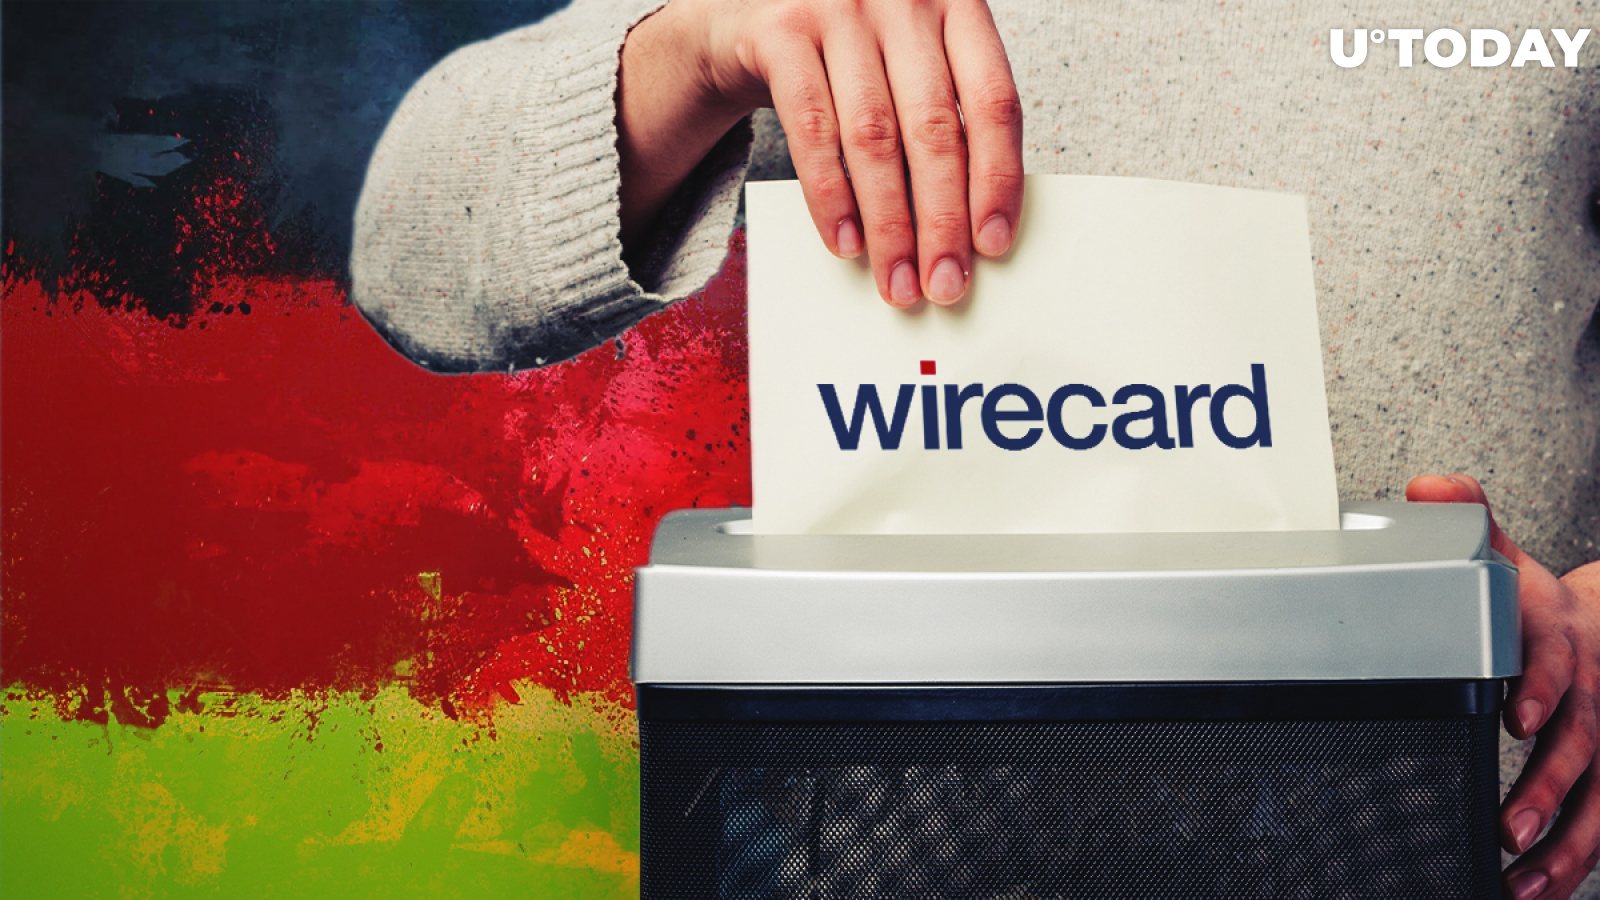  Wirecard to Be Removed from Germany’s DAX Index While Its Former Head of Operations Is Wanted for Embezzlement